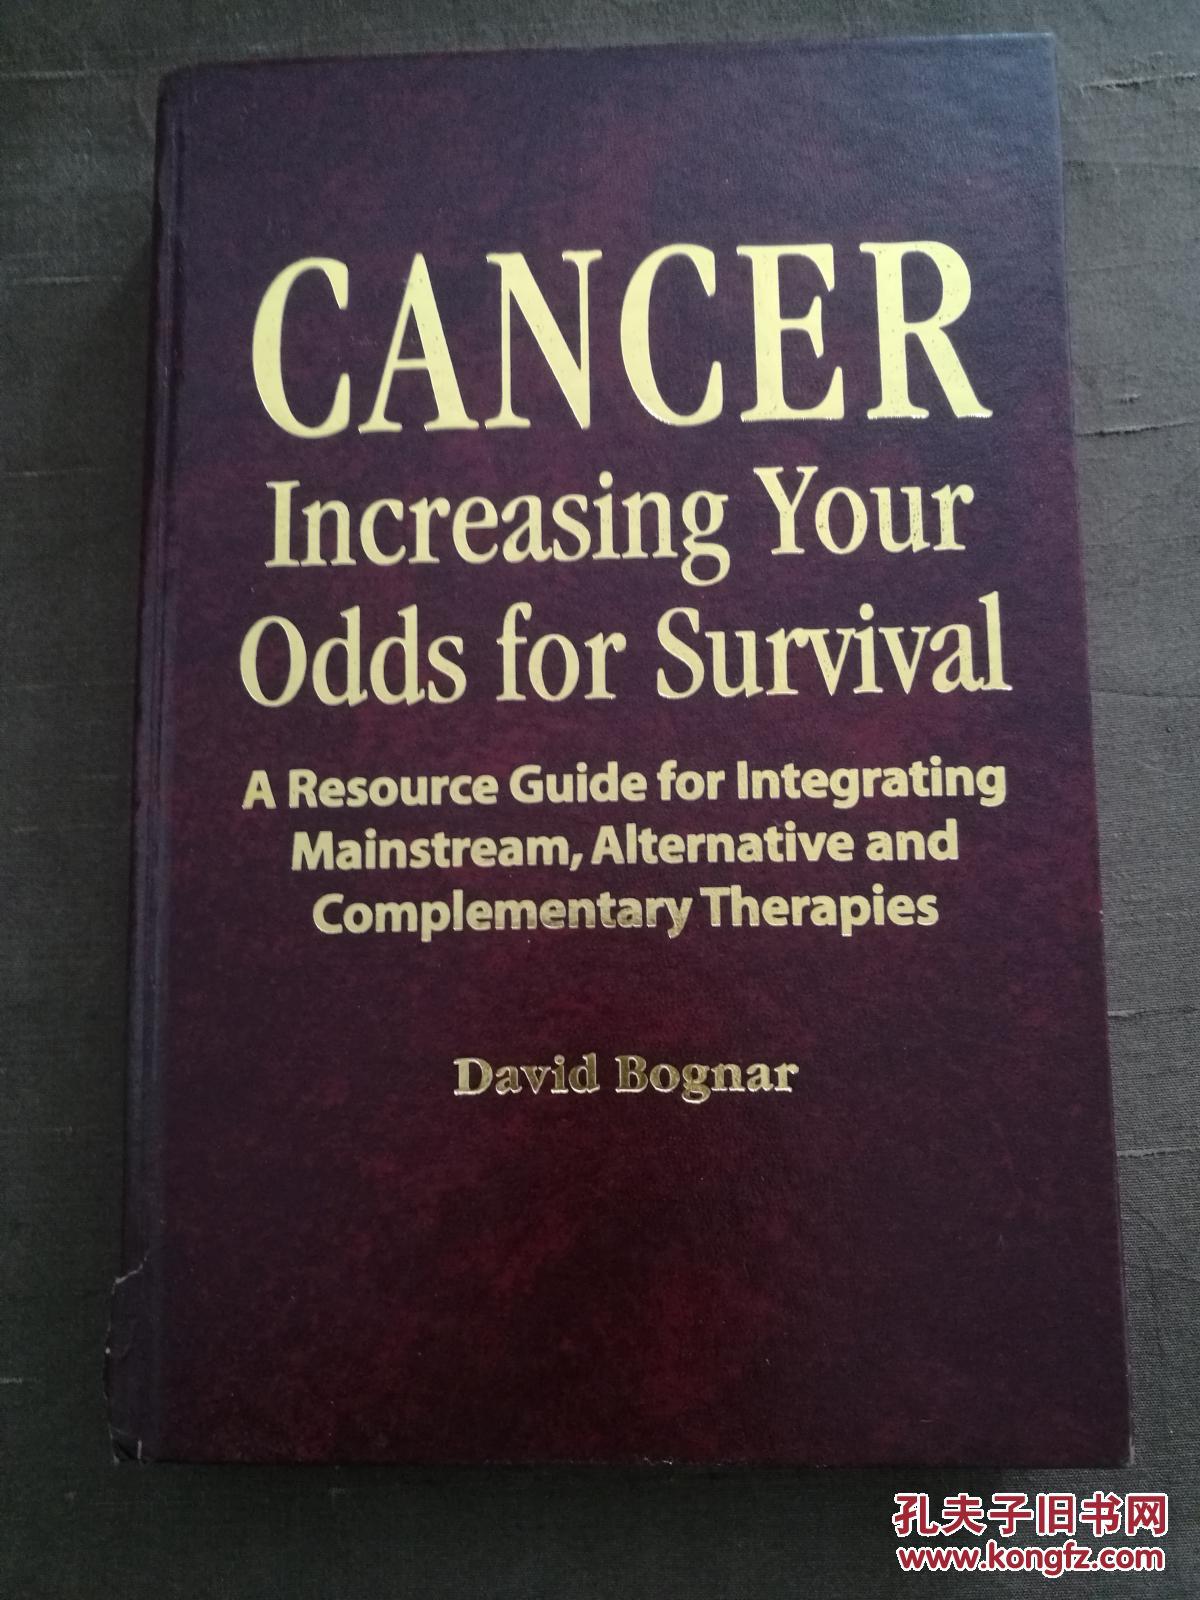 CANCER：INCREASING YOUR ODDS FOR SURVIVAL  癌症：增加生存几率